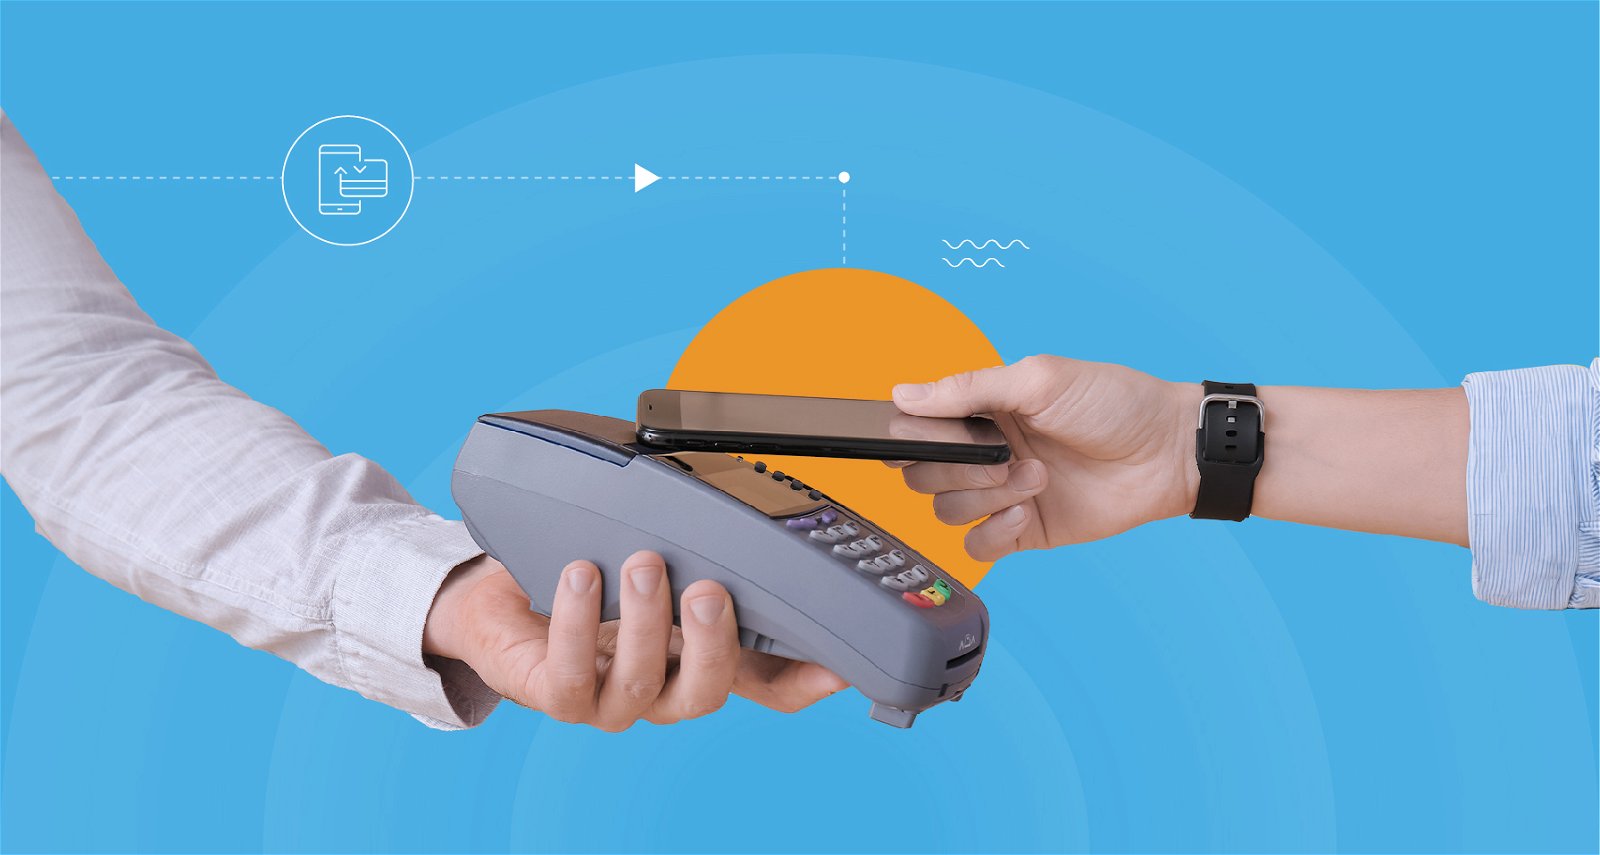 More Than a Financial Product: Prepaid as an Enabler for Mobile Payments